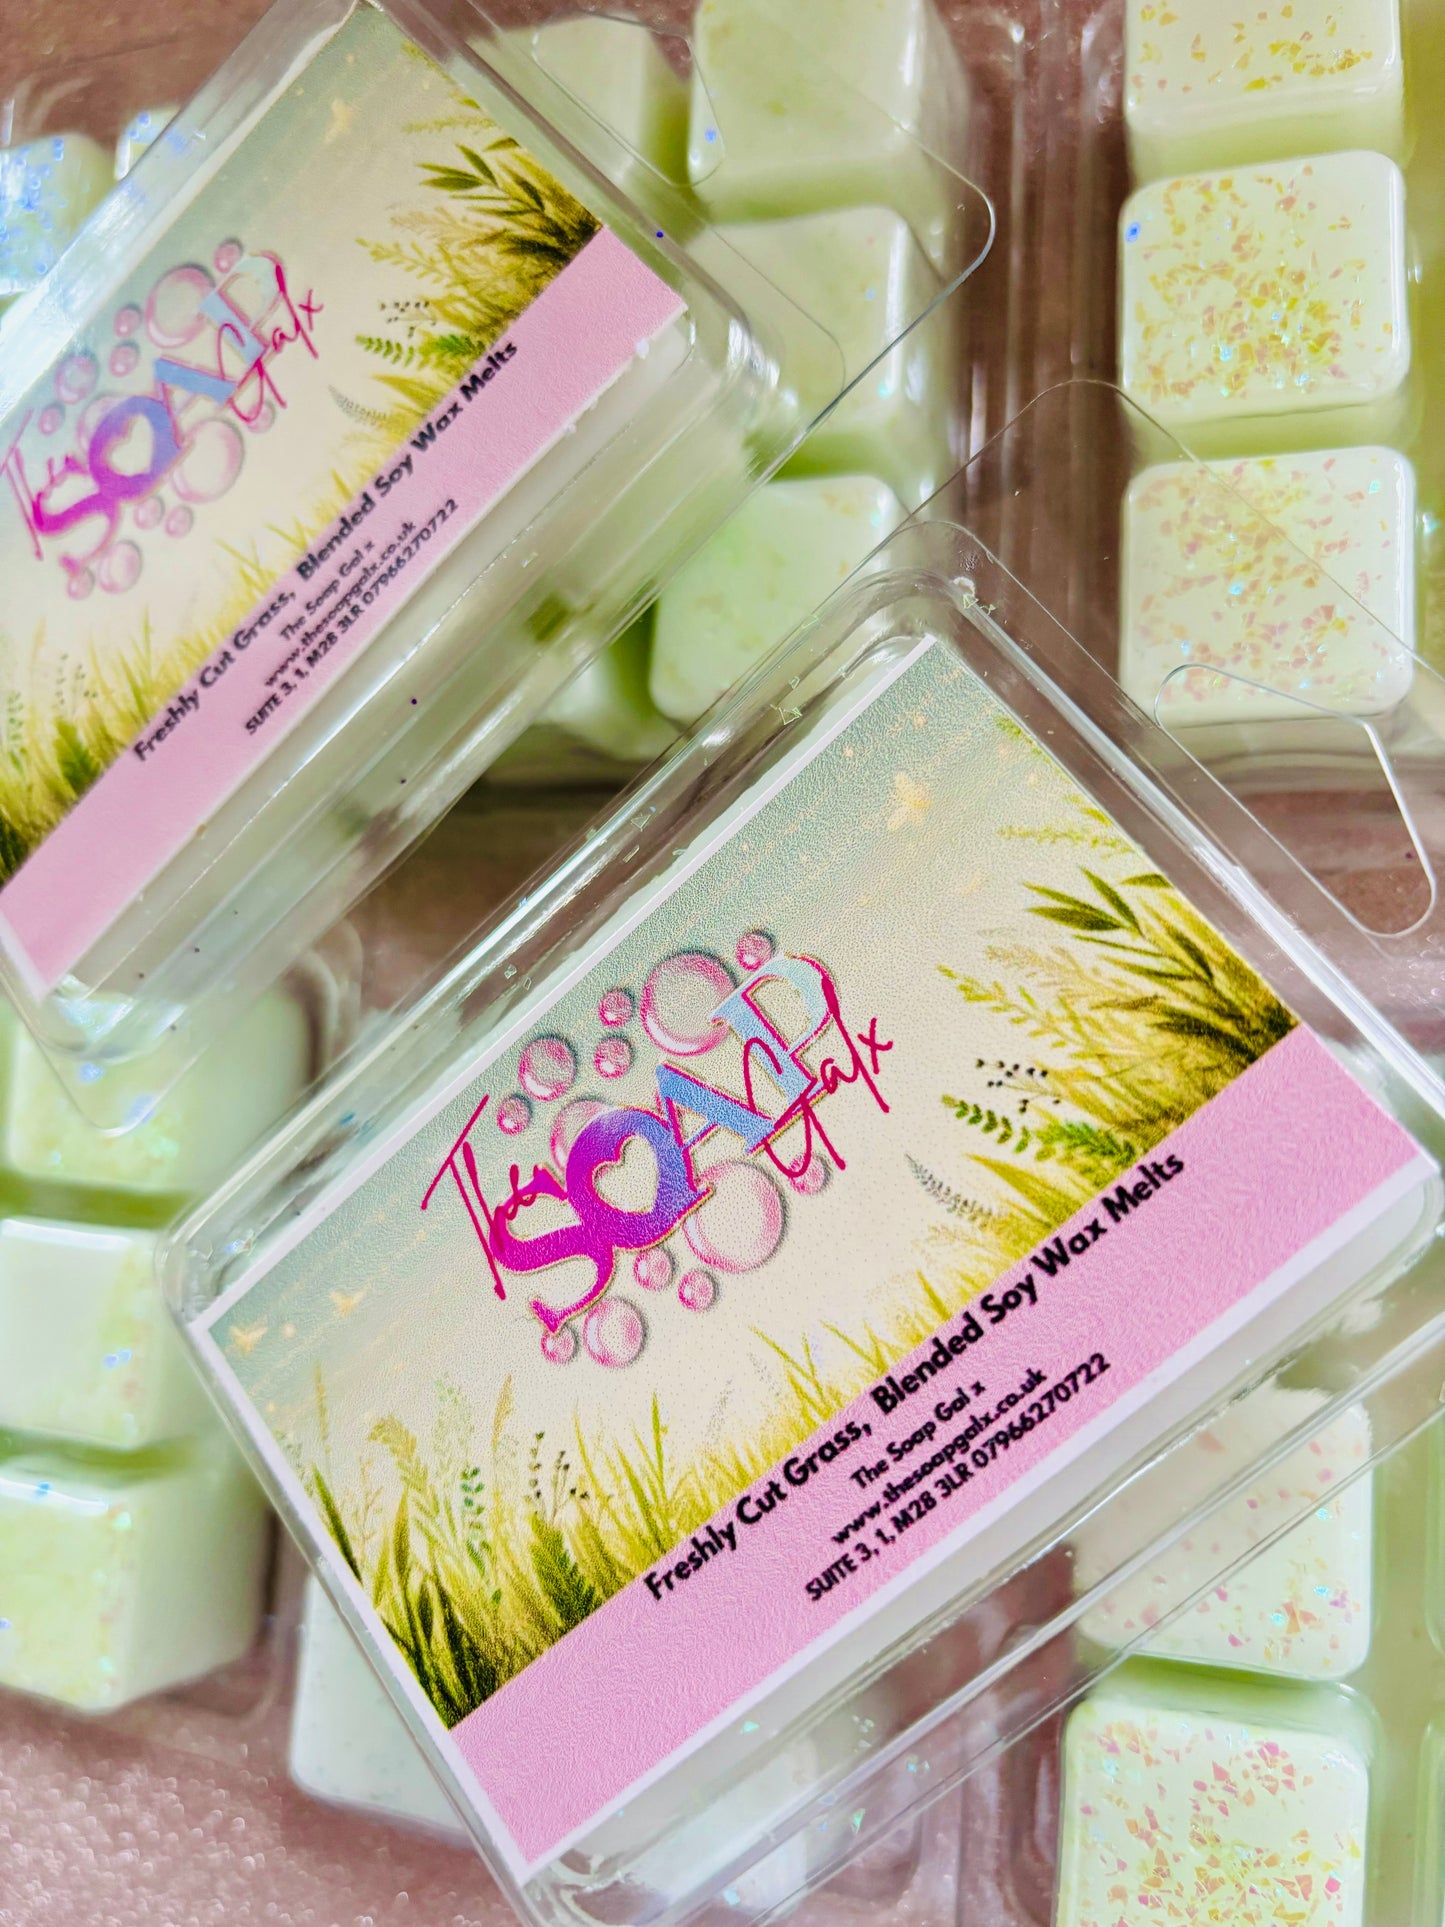 Handmade scented Fresh Cut Grass Wax Melts with packaging, featuring a blend of fresh cut grass and violet notes by The Soap Gal.